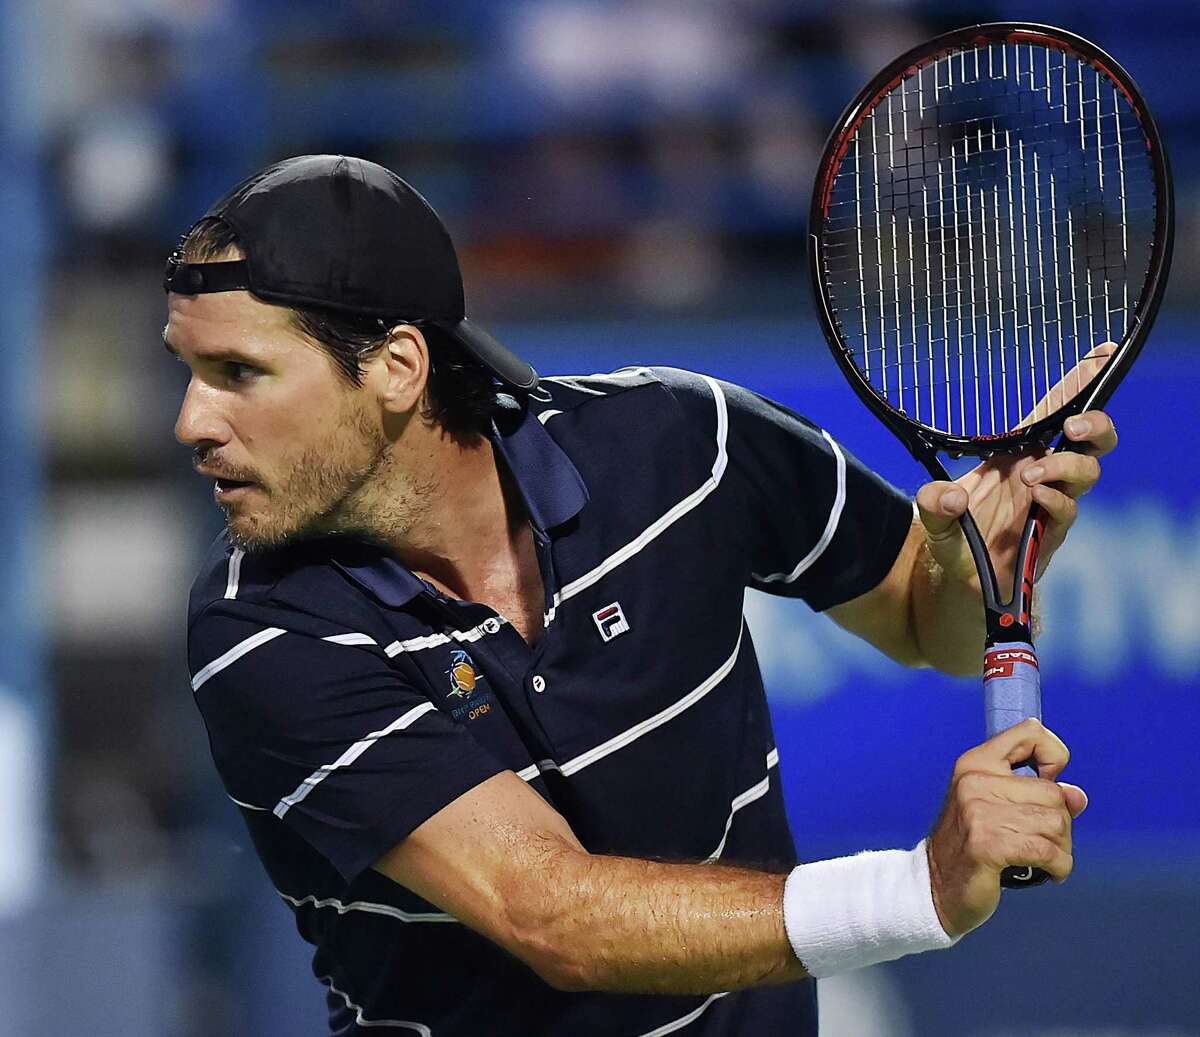 Germany's Tommy Haas returns a shot to USA's James Blake on Stadium Court Thursday, August 23, 2018, in the Invesco series QQQ Men's Legends at the Connecticut Open at the Connecticut Tennis Center at Yale in New Haven. Blake, 6-4.